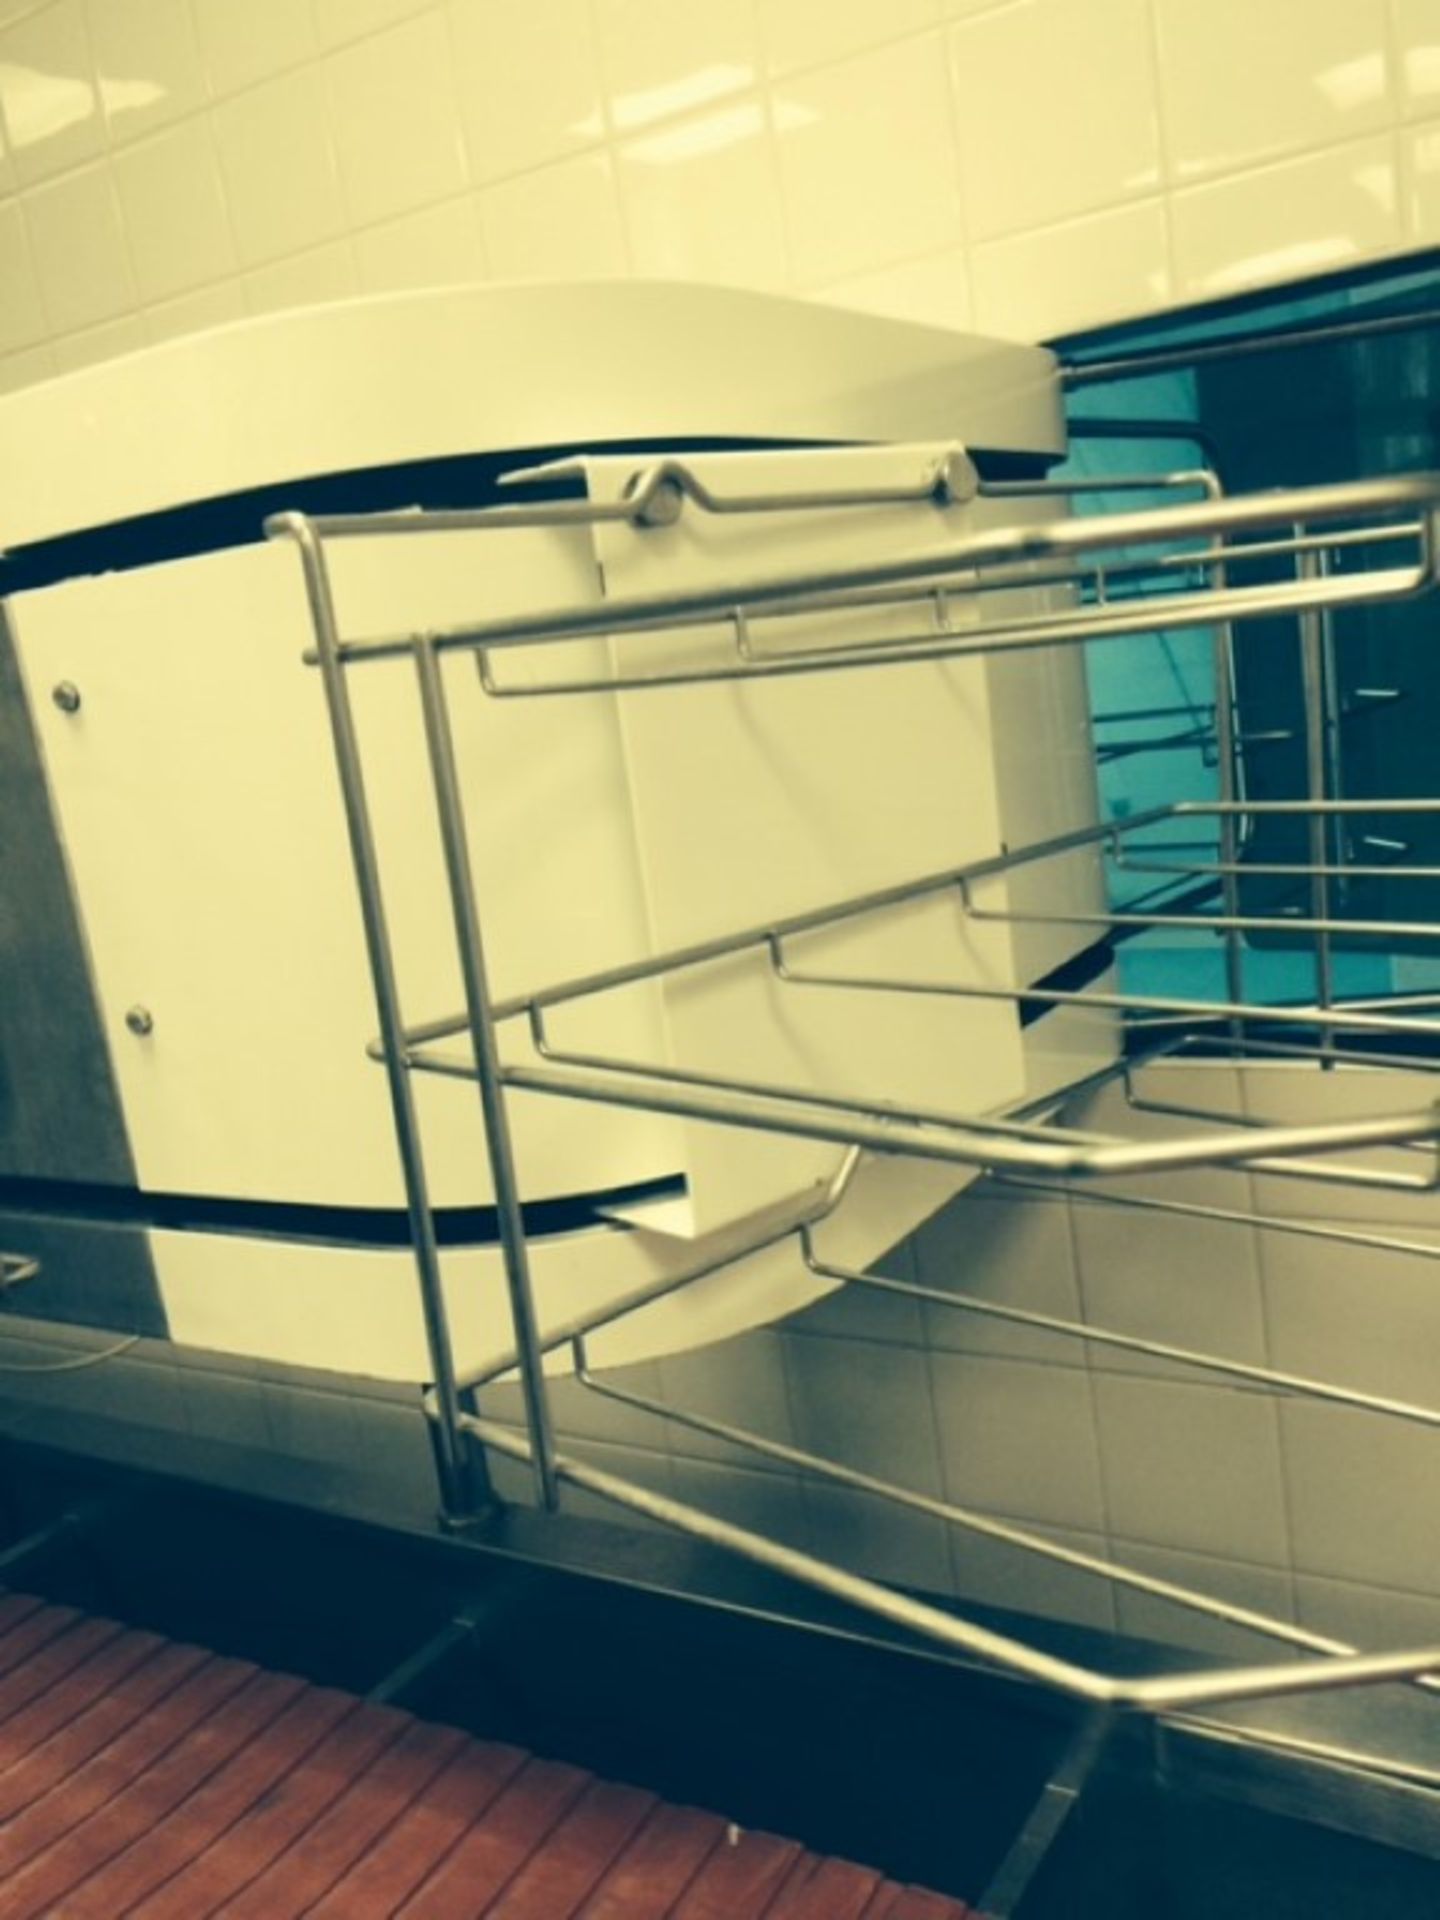 1 x Hobart Rack Conveyor Dishwasher - Stainless Steel Commercial Kitchen Equipment - With Pot - Image 7 of 28